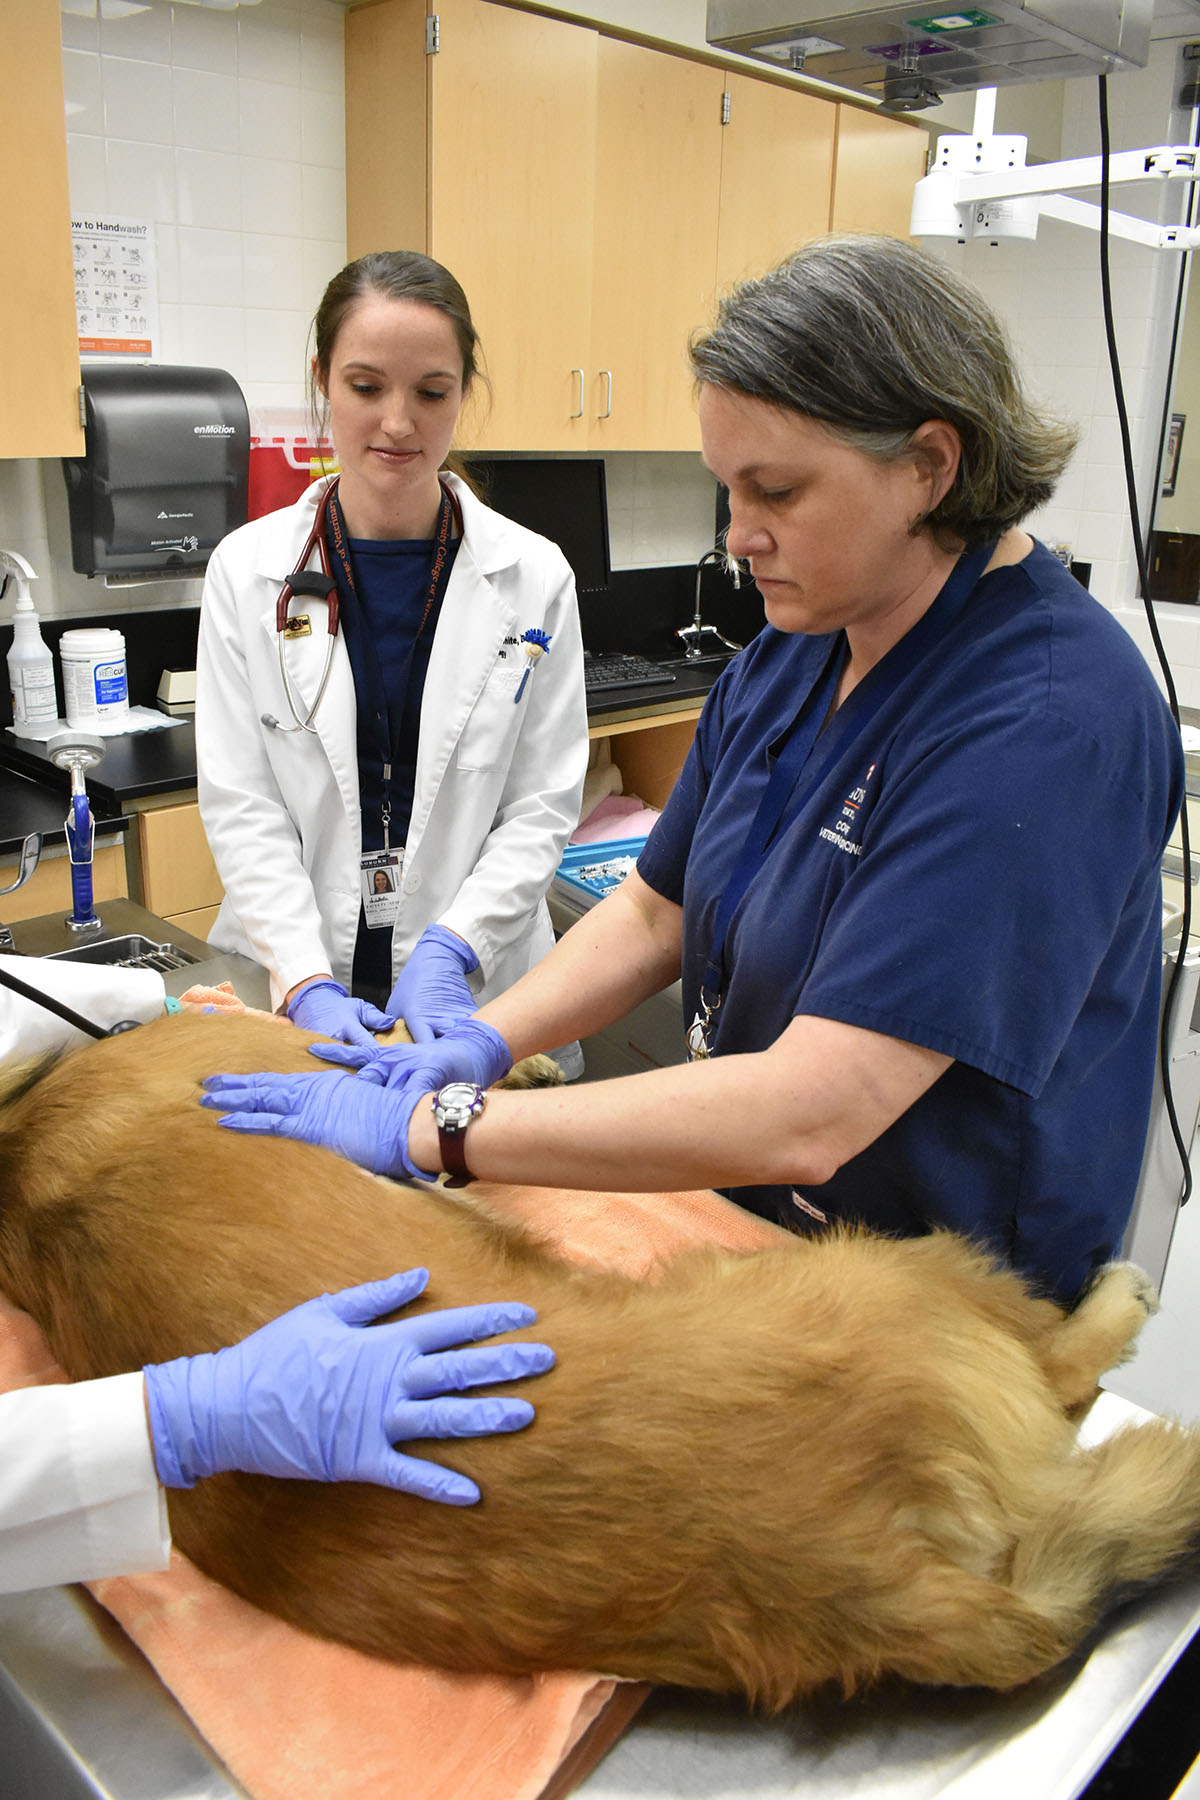 Veterinary technician Missy Streicher, right, and Dr. Amelia White, examine a patient undergoing allergy tests.